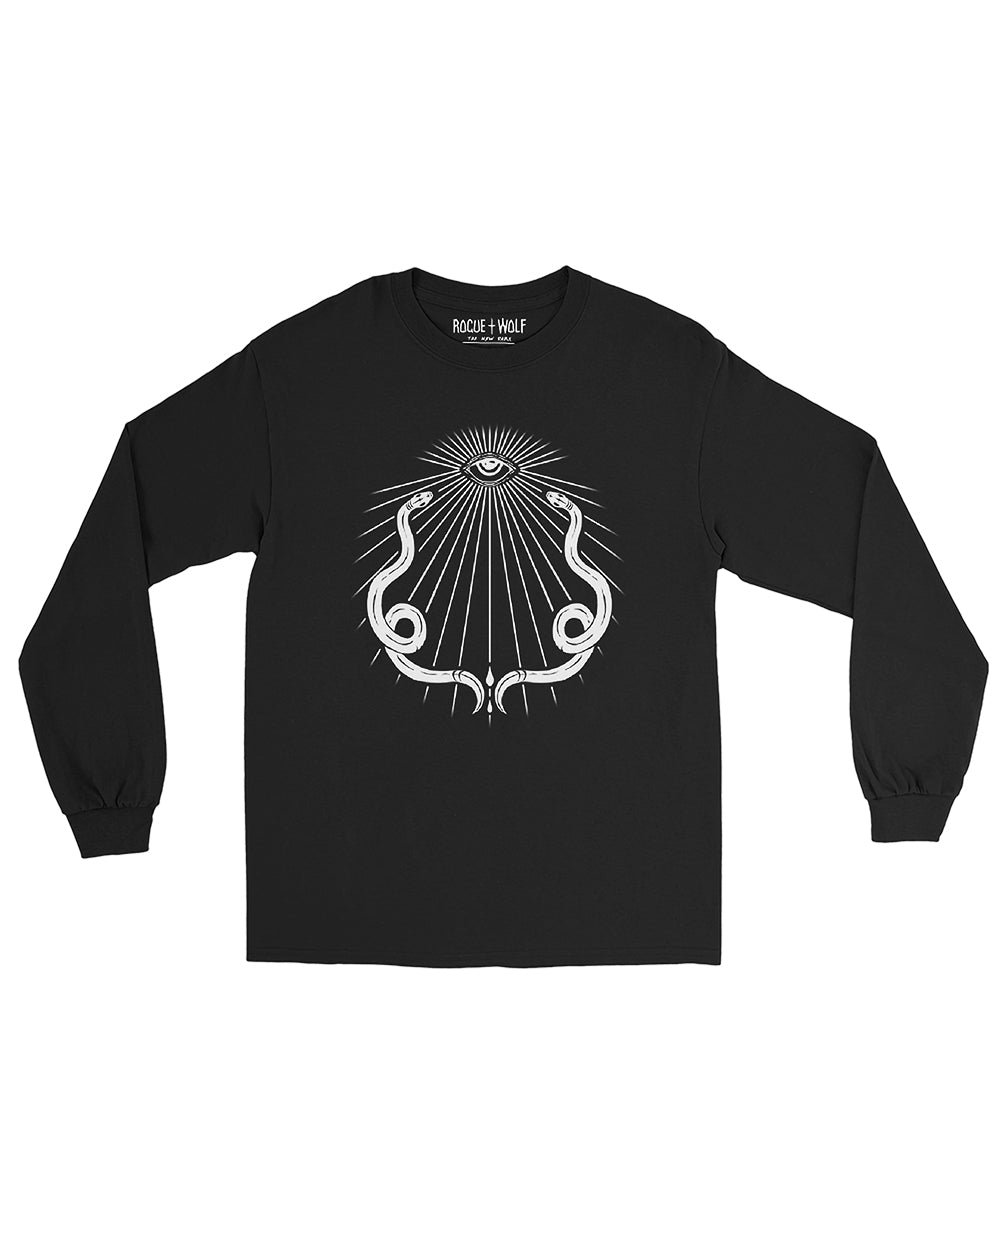 Serpent’s Gaze Long Sleeve Tee - Witchy Gothic Grunge Alt Goth Style Dark Academia Snake Graphic Tee Pagan